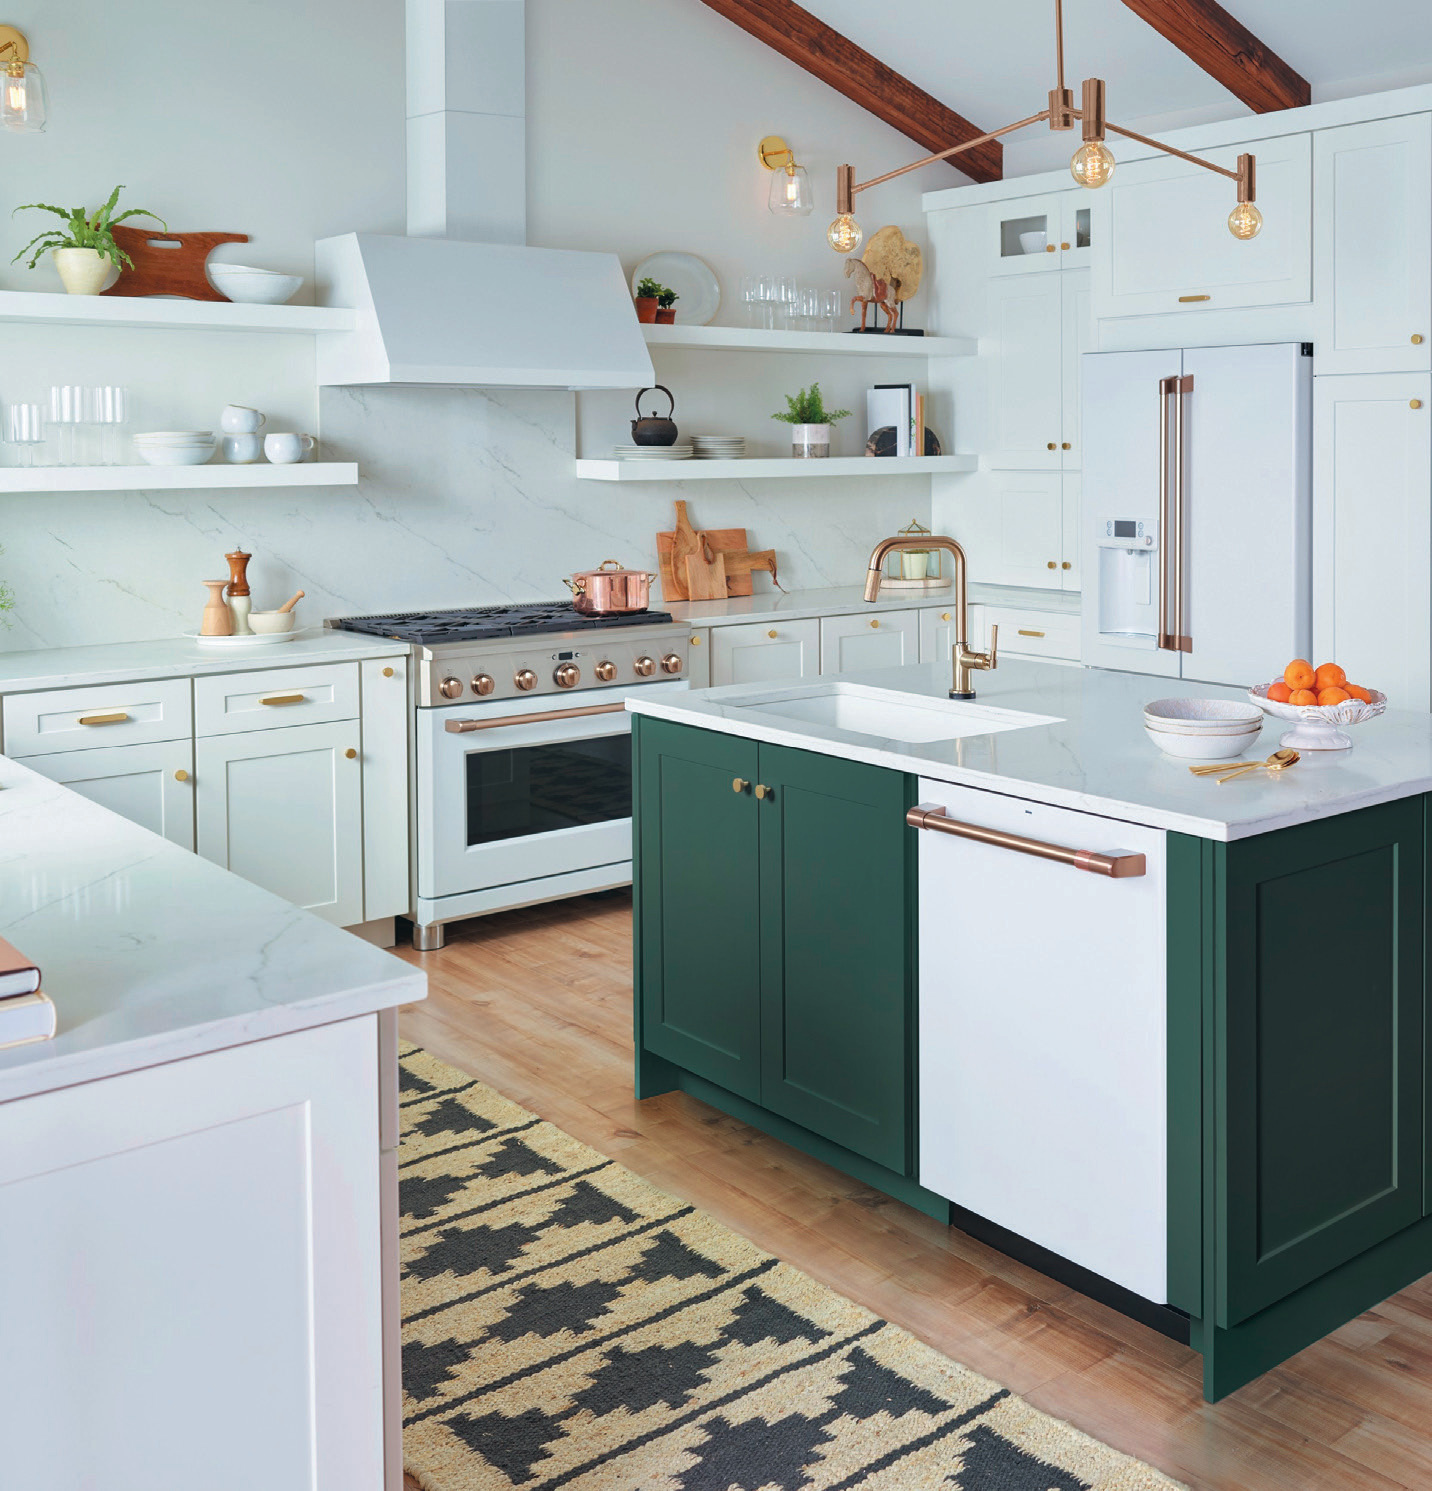 Green kitchen appliances are trending – here's why